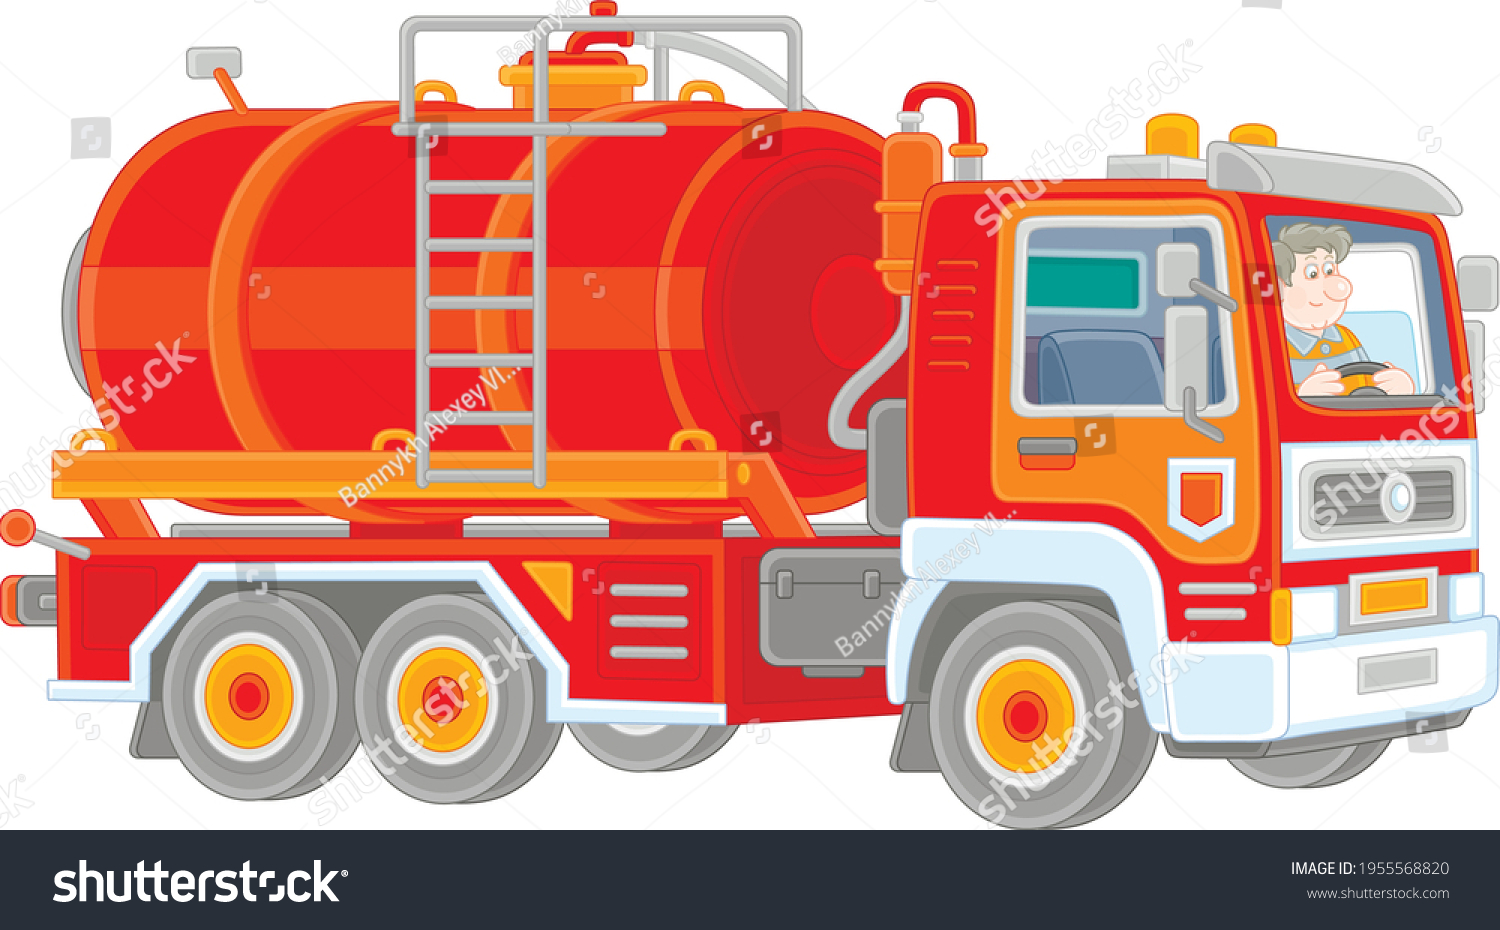 SVG of Red toy gasoline auto tanker with a funny driver in service uniform, vector cartoon illustration isolated on a white background svg